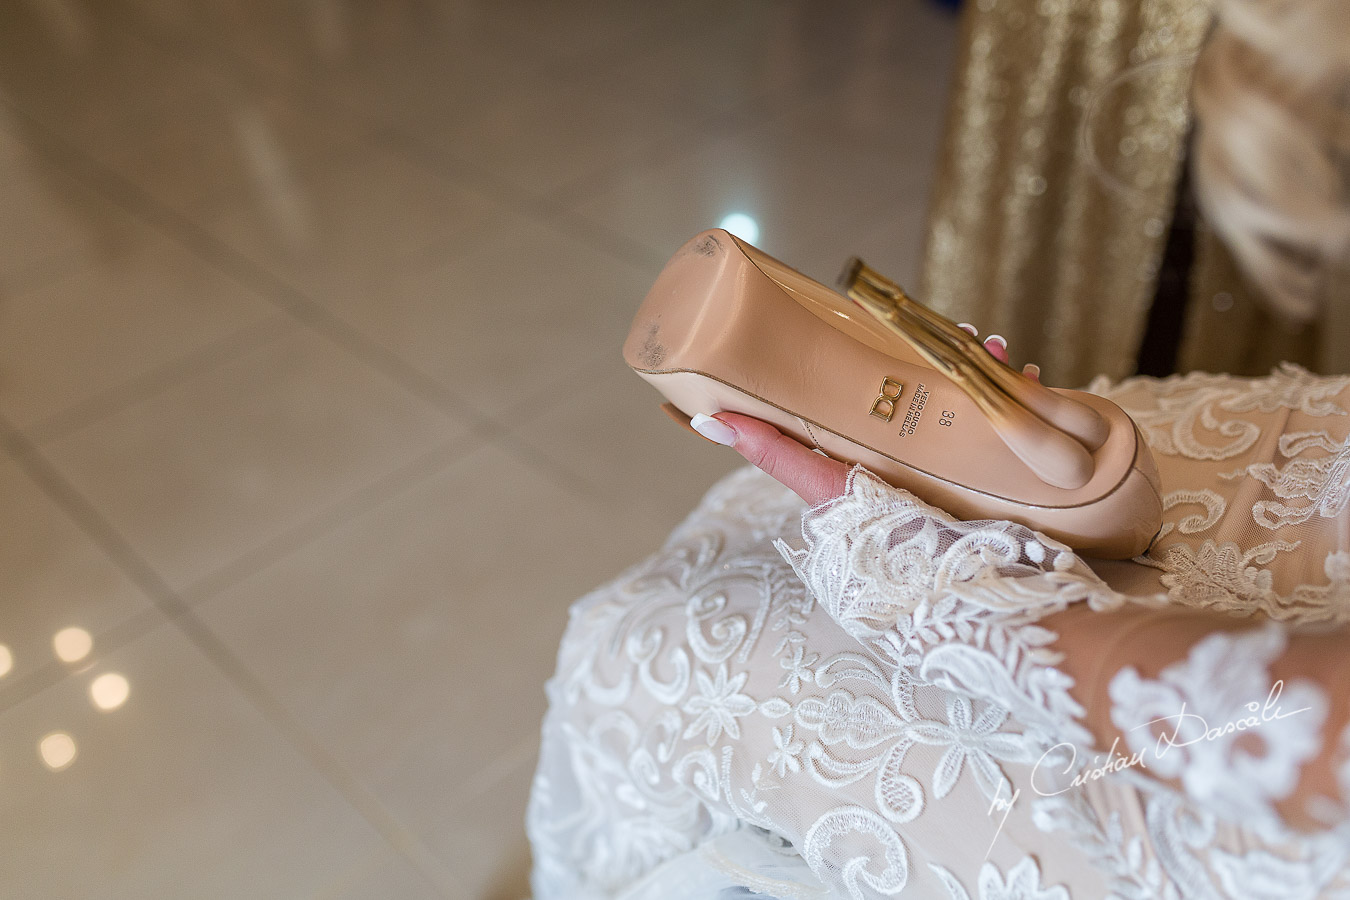 Traditional Zomanta moments from the bride's getting ready captured at an elegant and romantic wedding at Elias Beach Hotel by Cristian Dascalu.